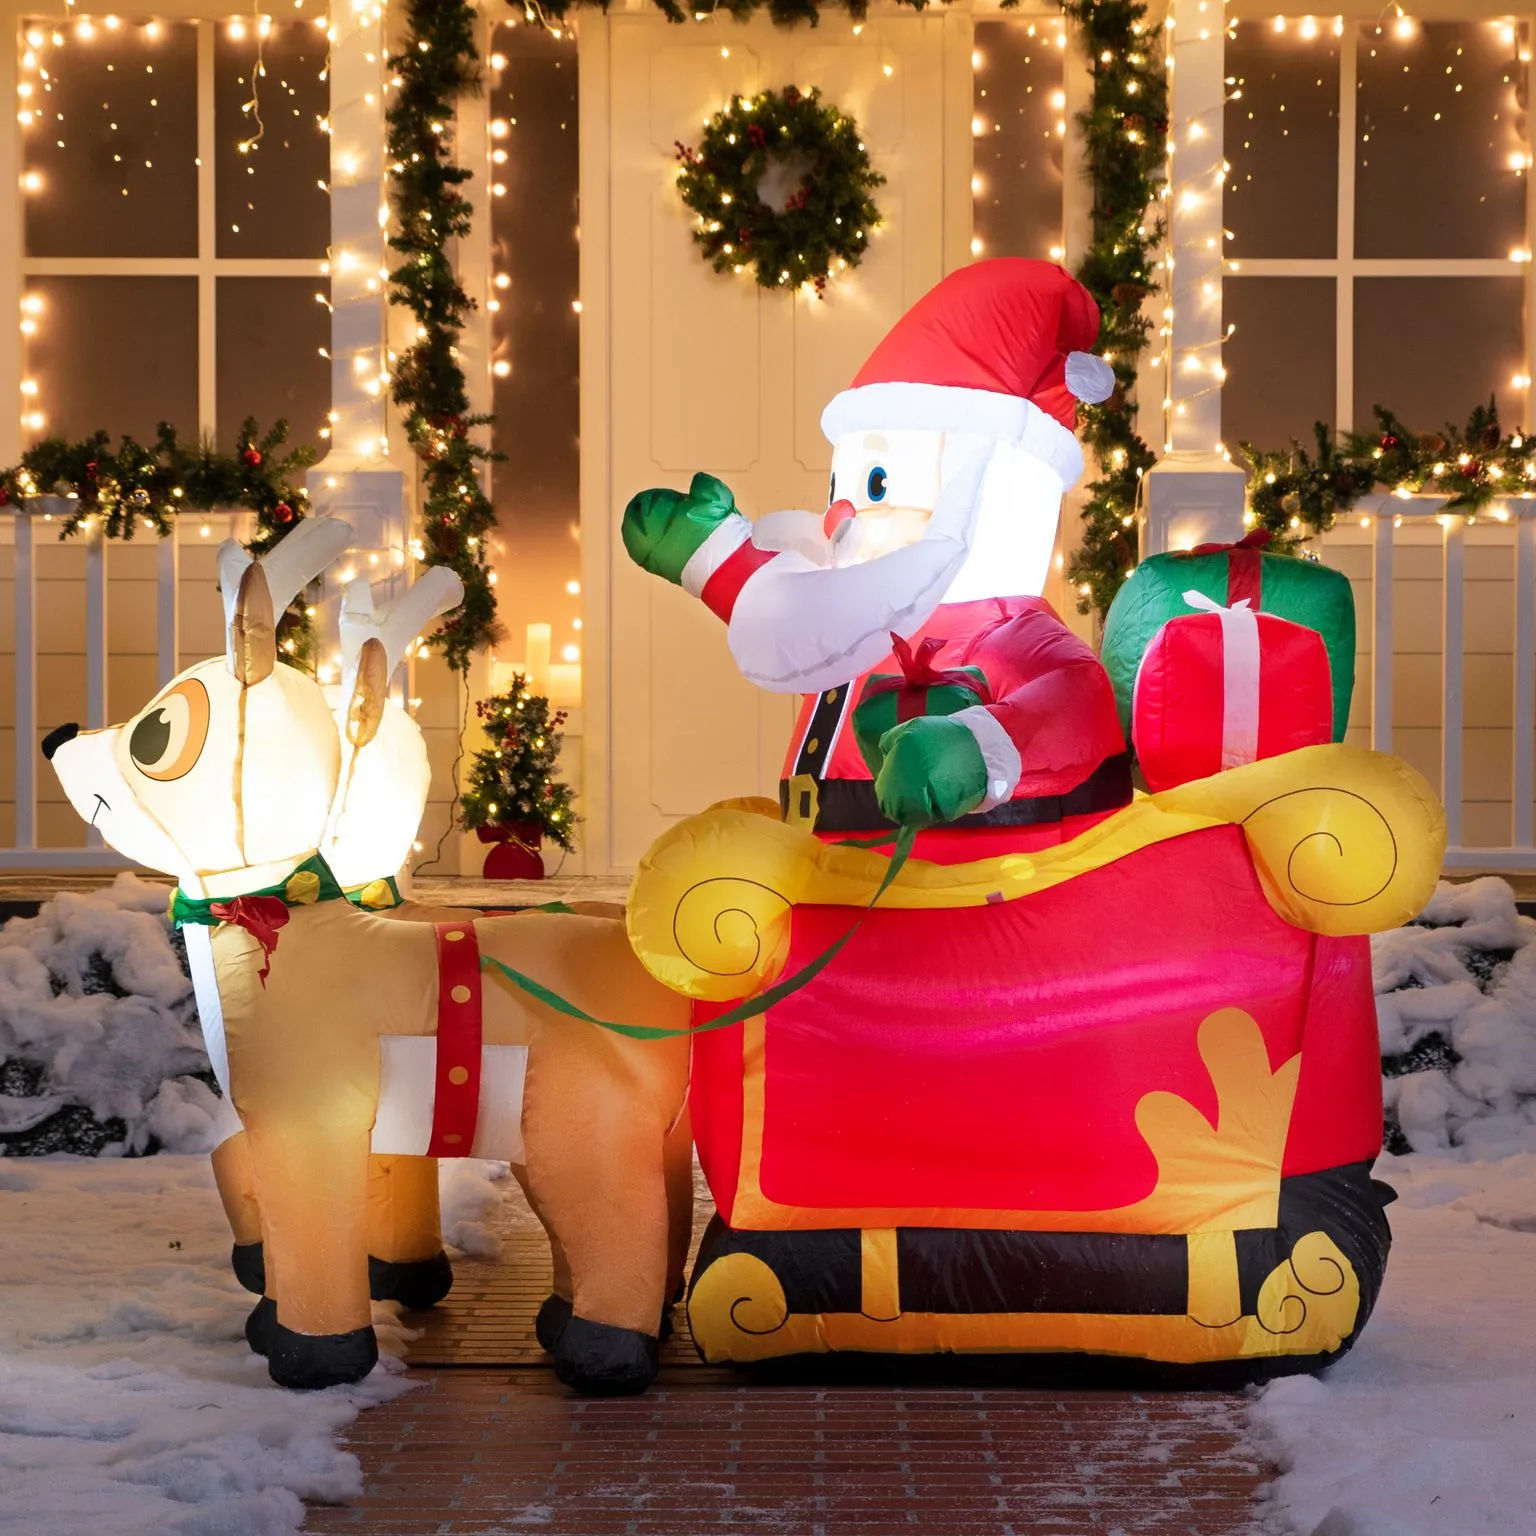 You are currently viewing Christmas Inflatables on Sale: Finding the Best Deals for Festive Decor